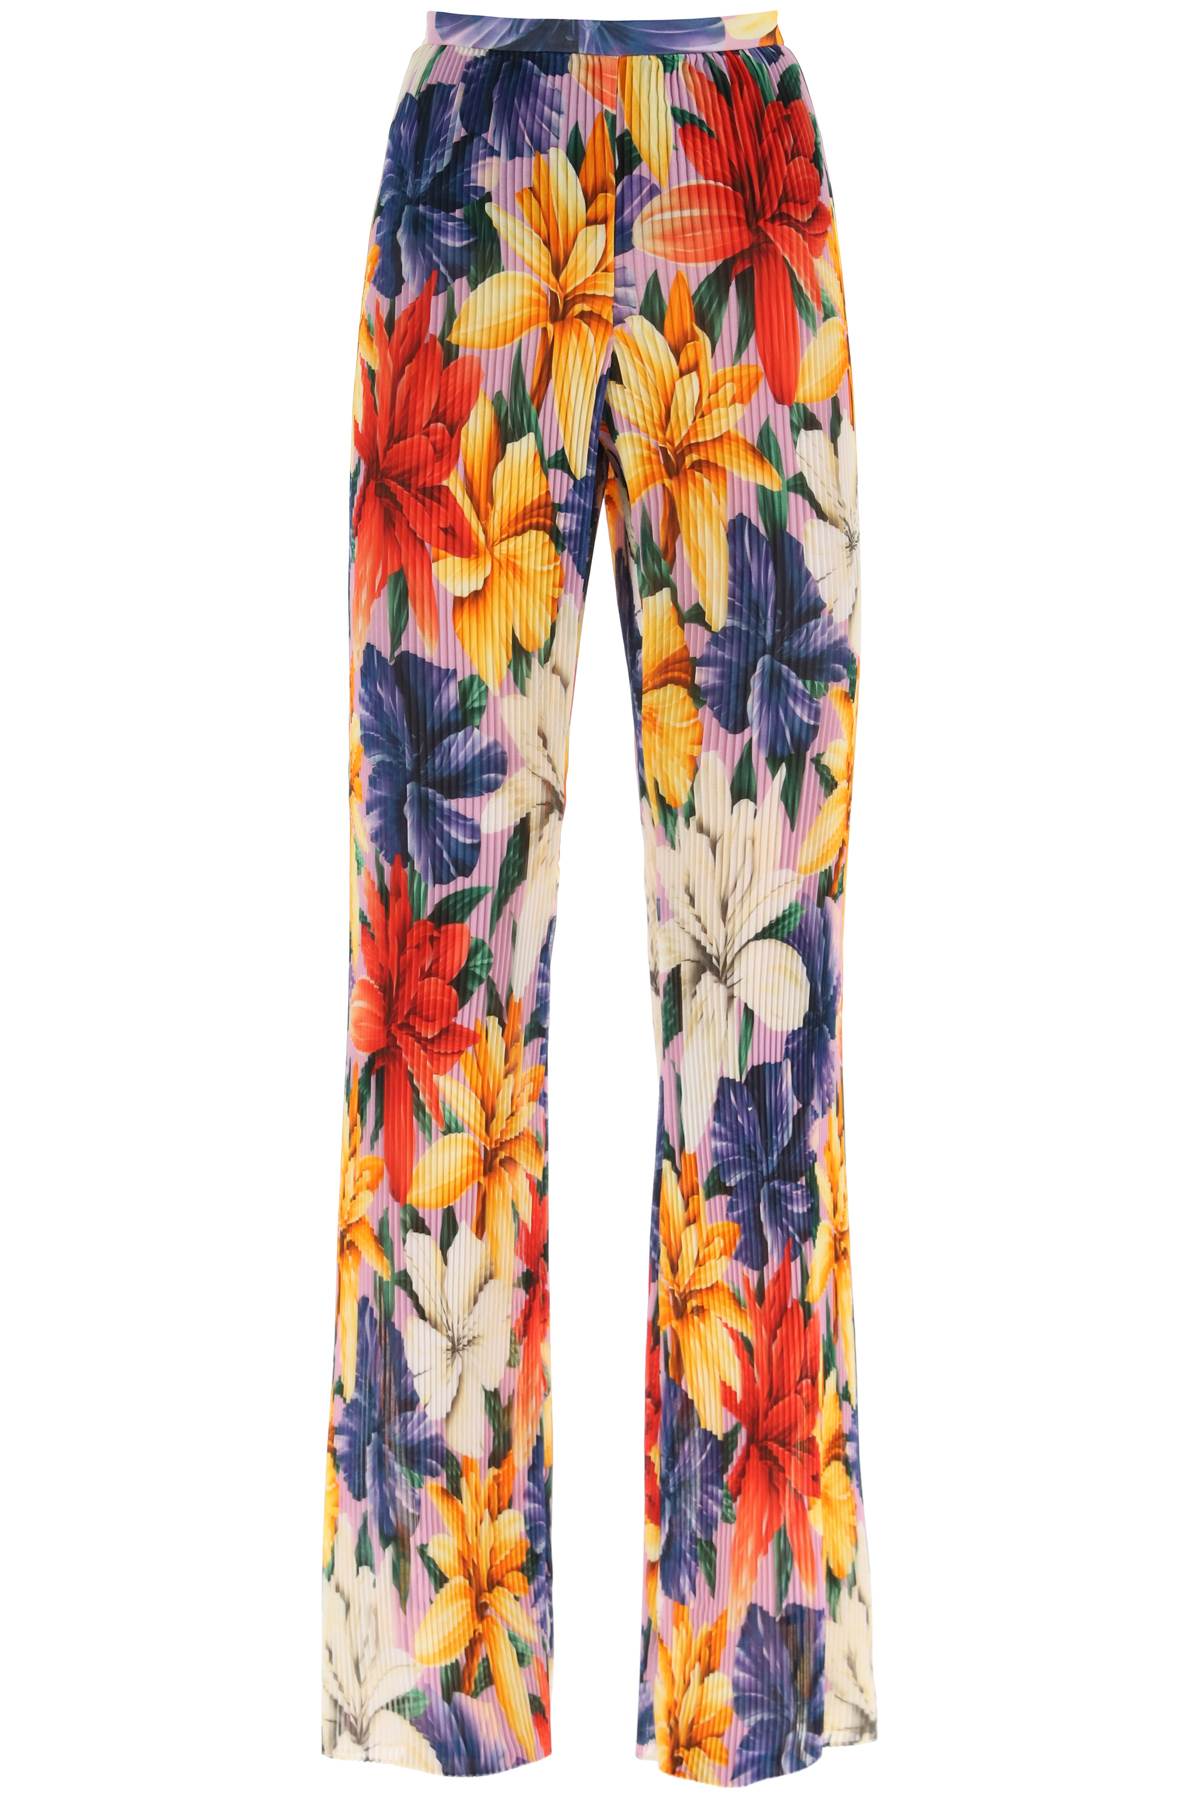 Etro floral pleated chiffon pants-0